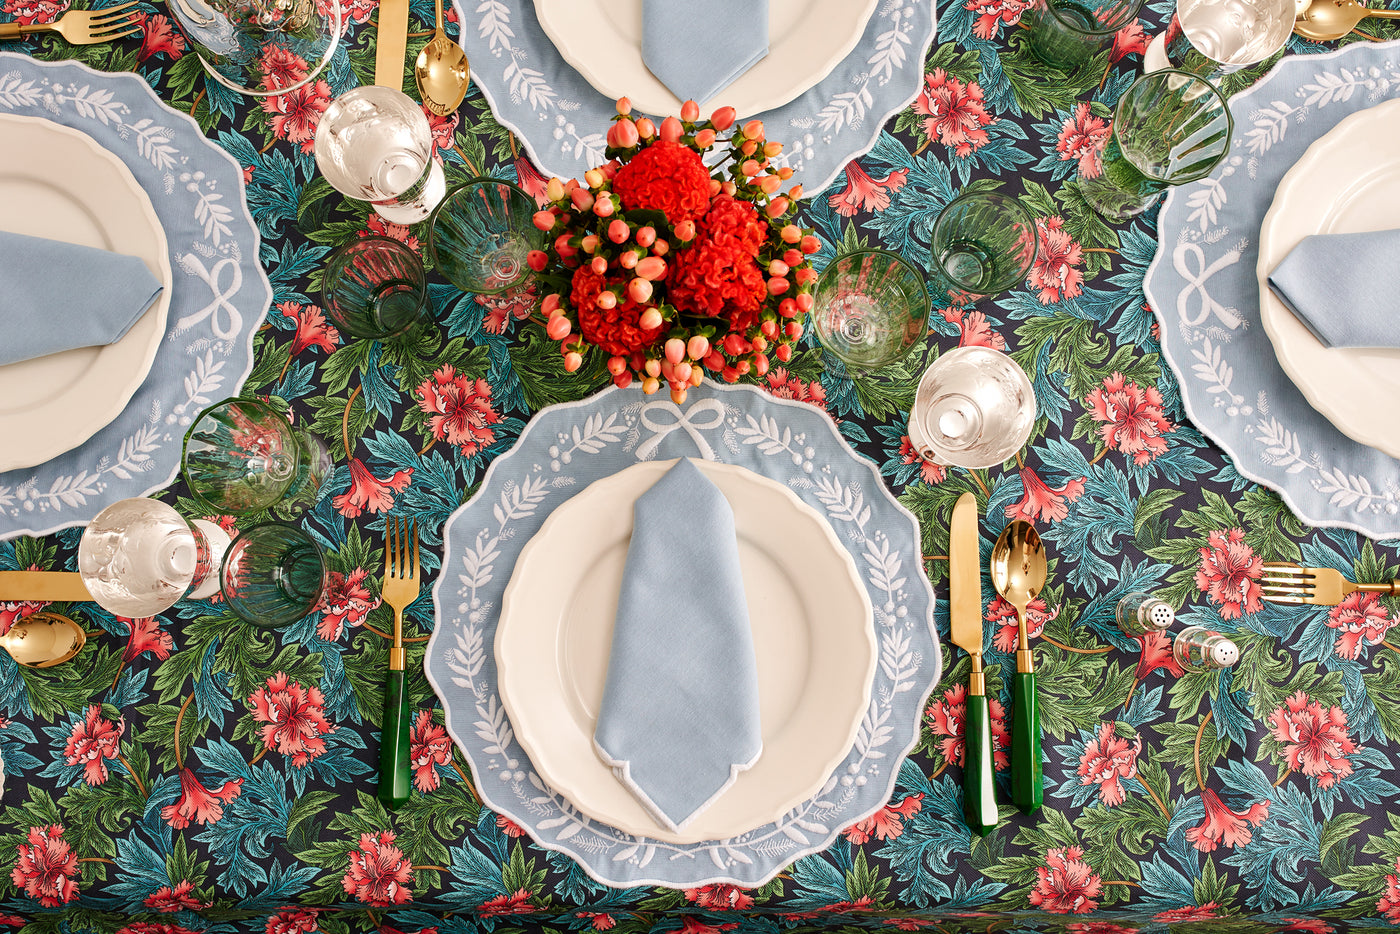 OTM Exclusive FLORENCE Placemat and Napkin Set